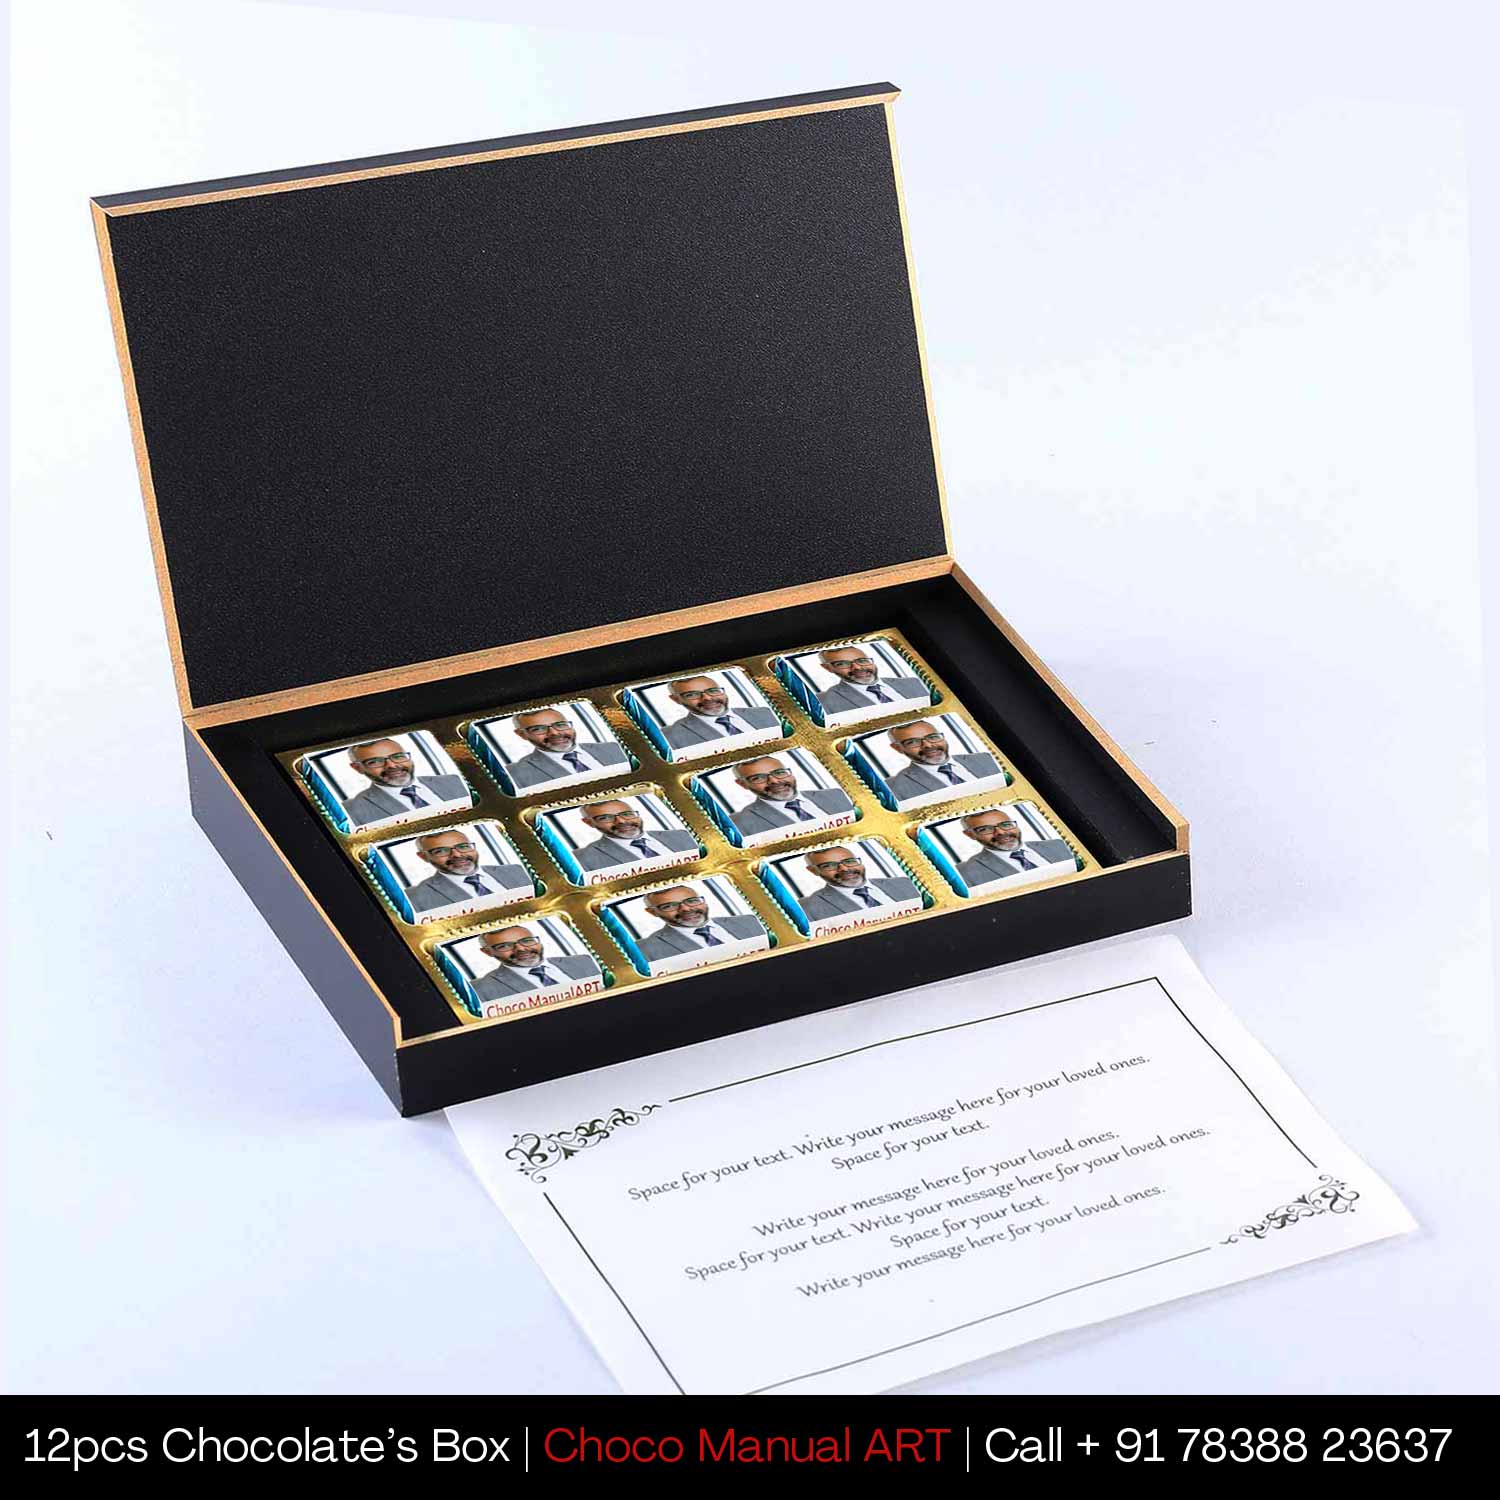 Thank you gifts for colleagues I  Image/Name printed chocolate box I  Delicious chocolates I  Free shipping across India I  Elegant wooden packaging